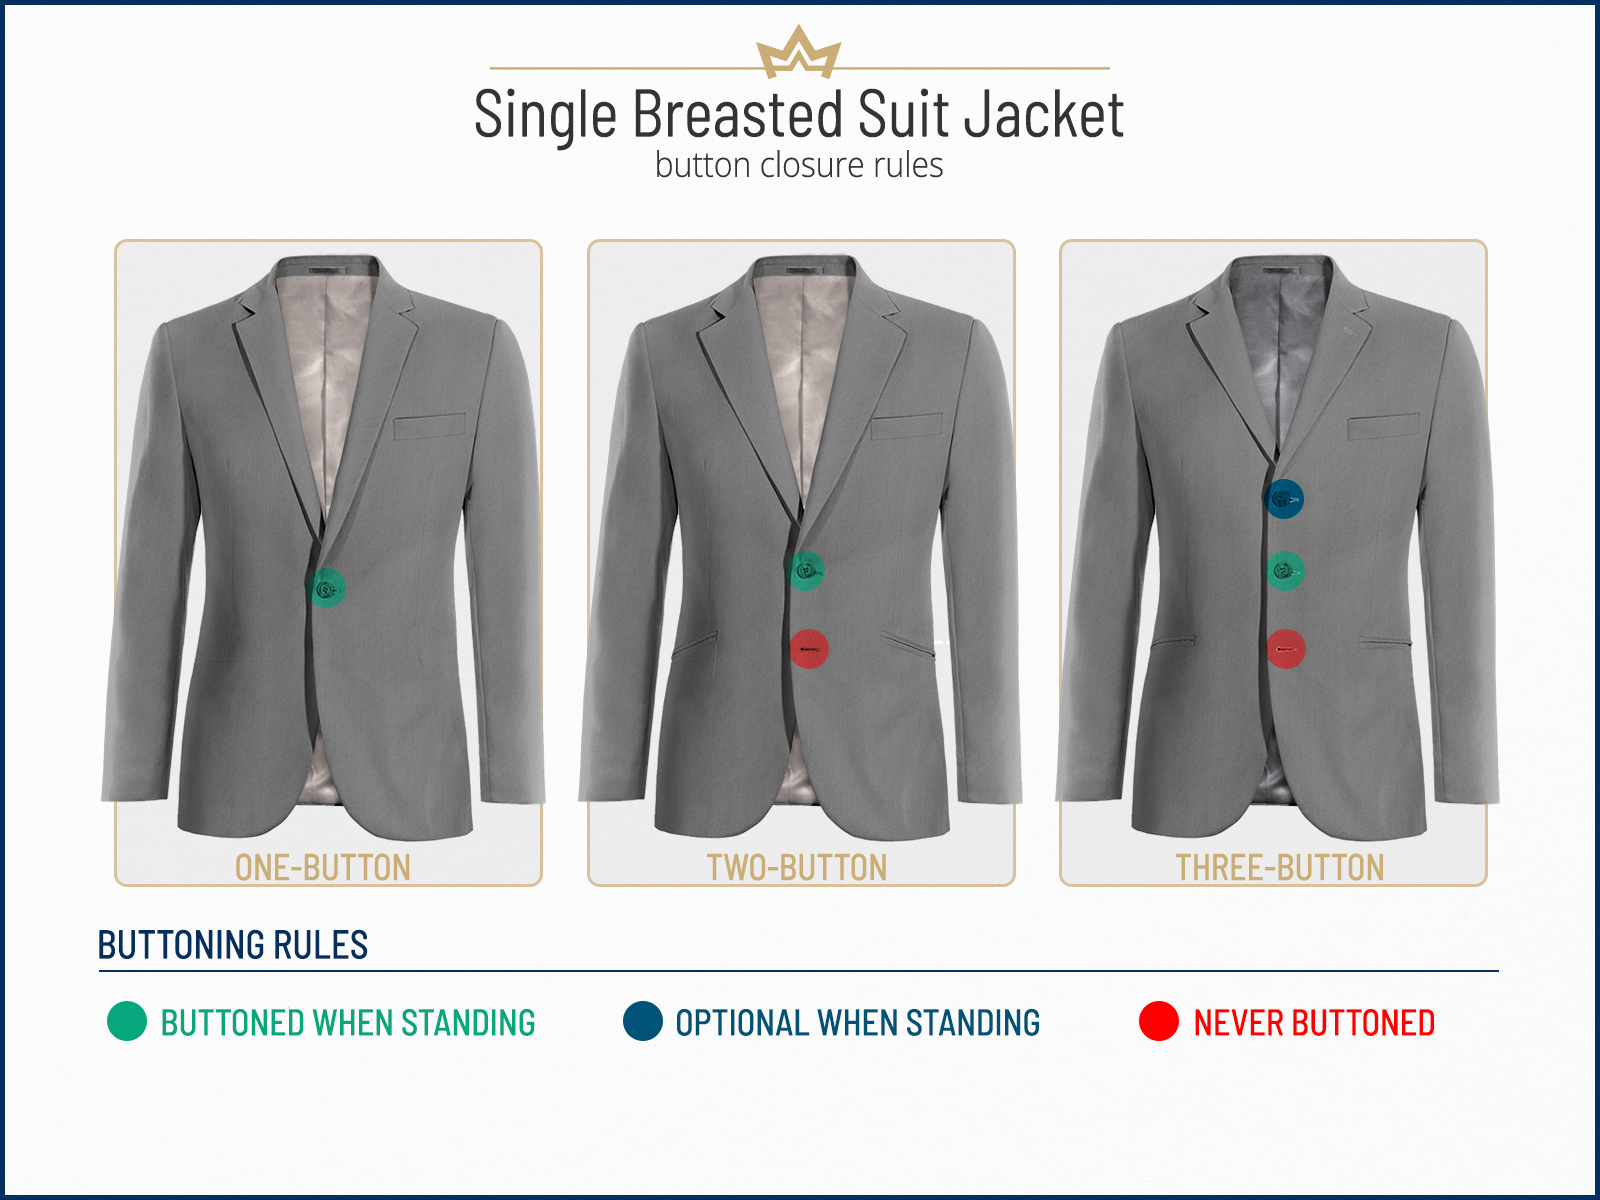 double breasted suit meaning